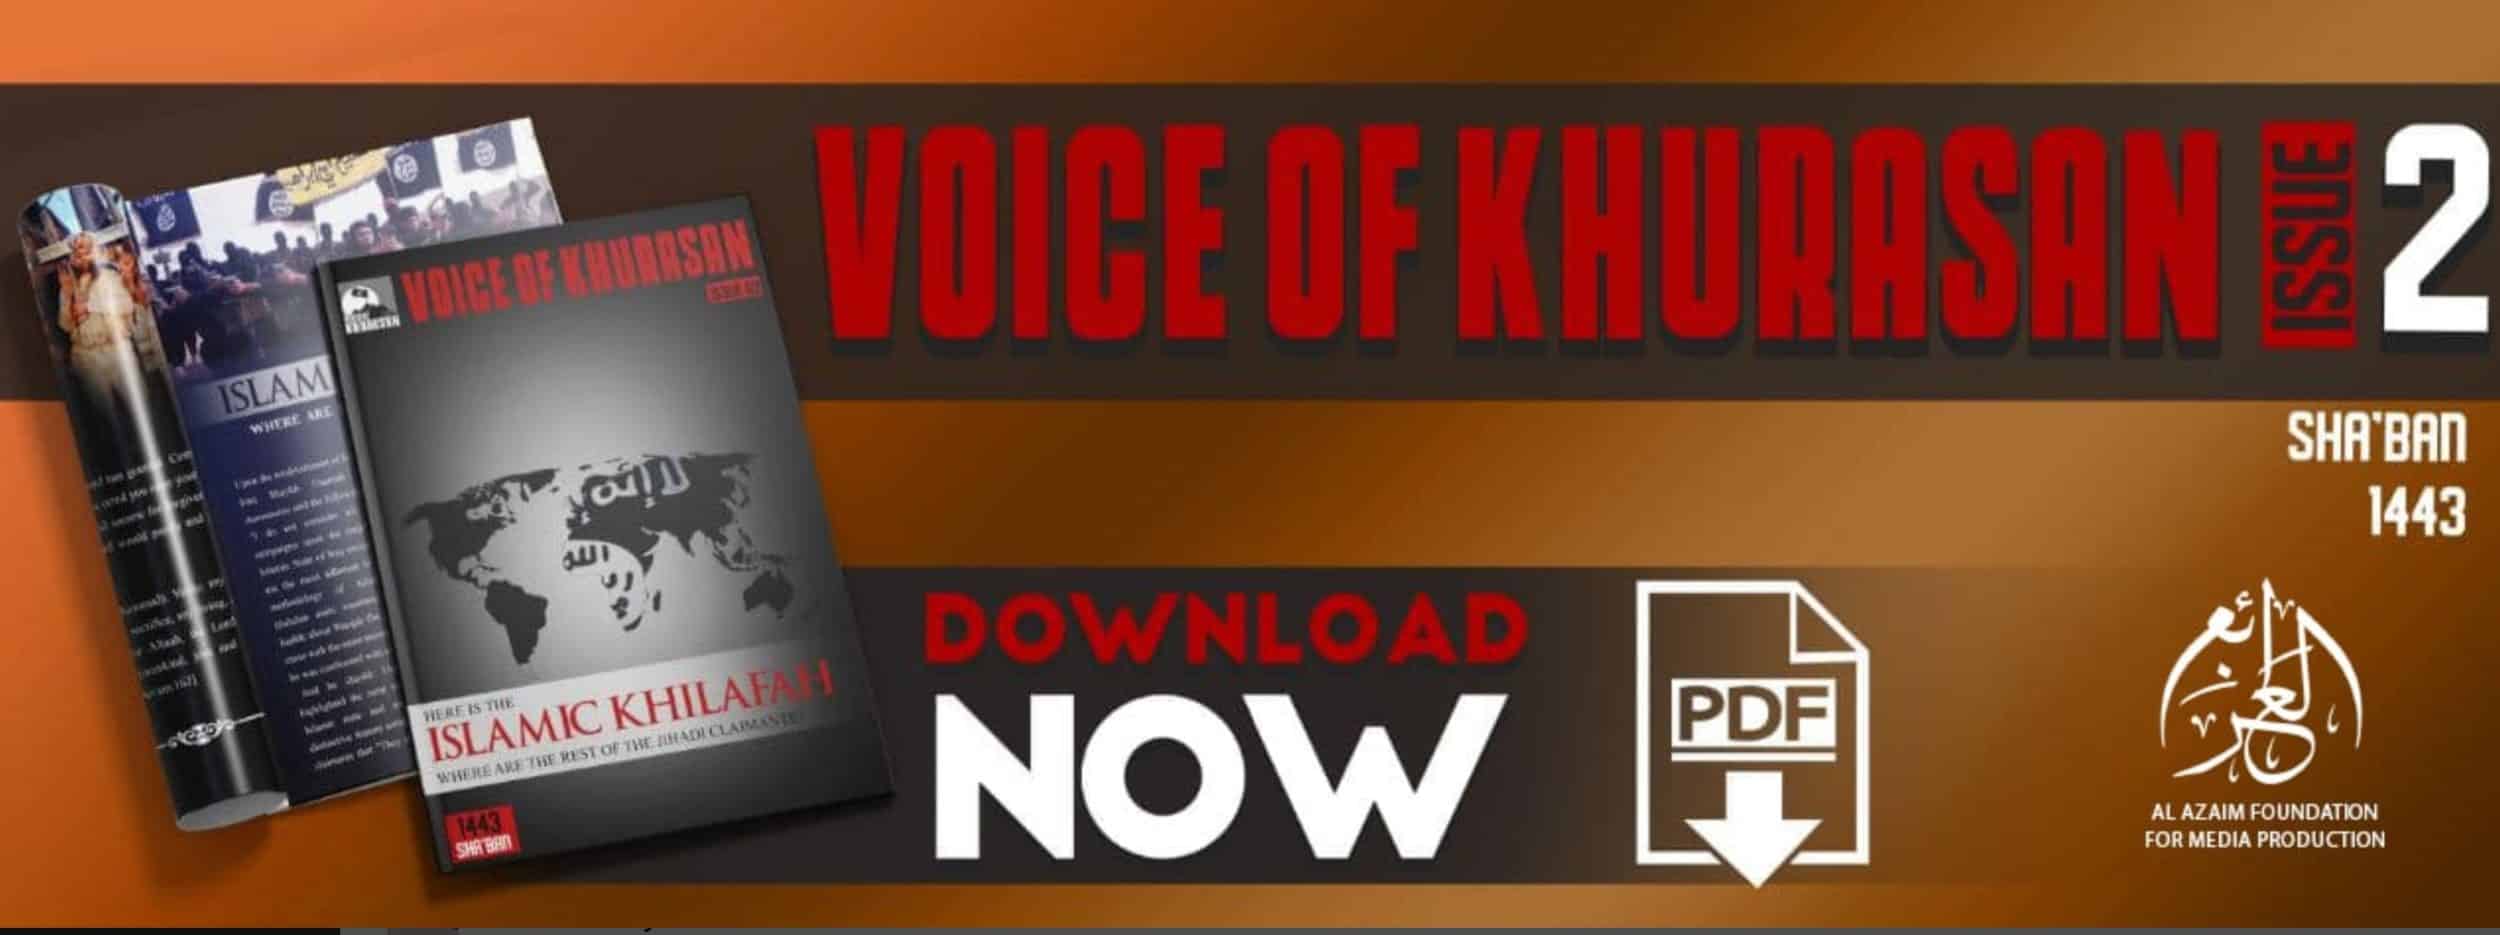 (PDF) al-Azaim Foundation (Unofficial Islamic State): Voice of Khurasan #2 "Here is the Islamic Khilafah Where Are the Rest of the Jihadi Claimants?" - 9 March 2022